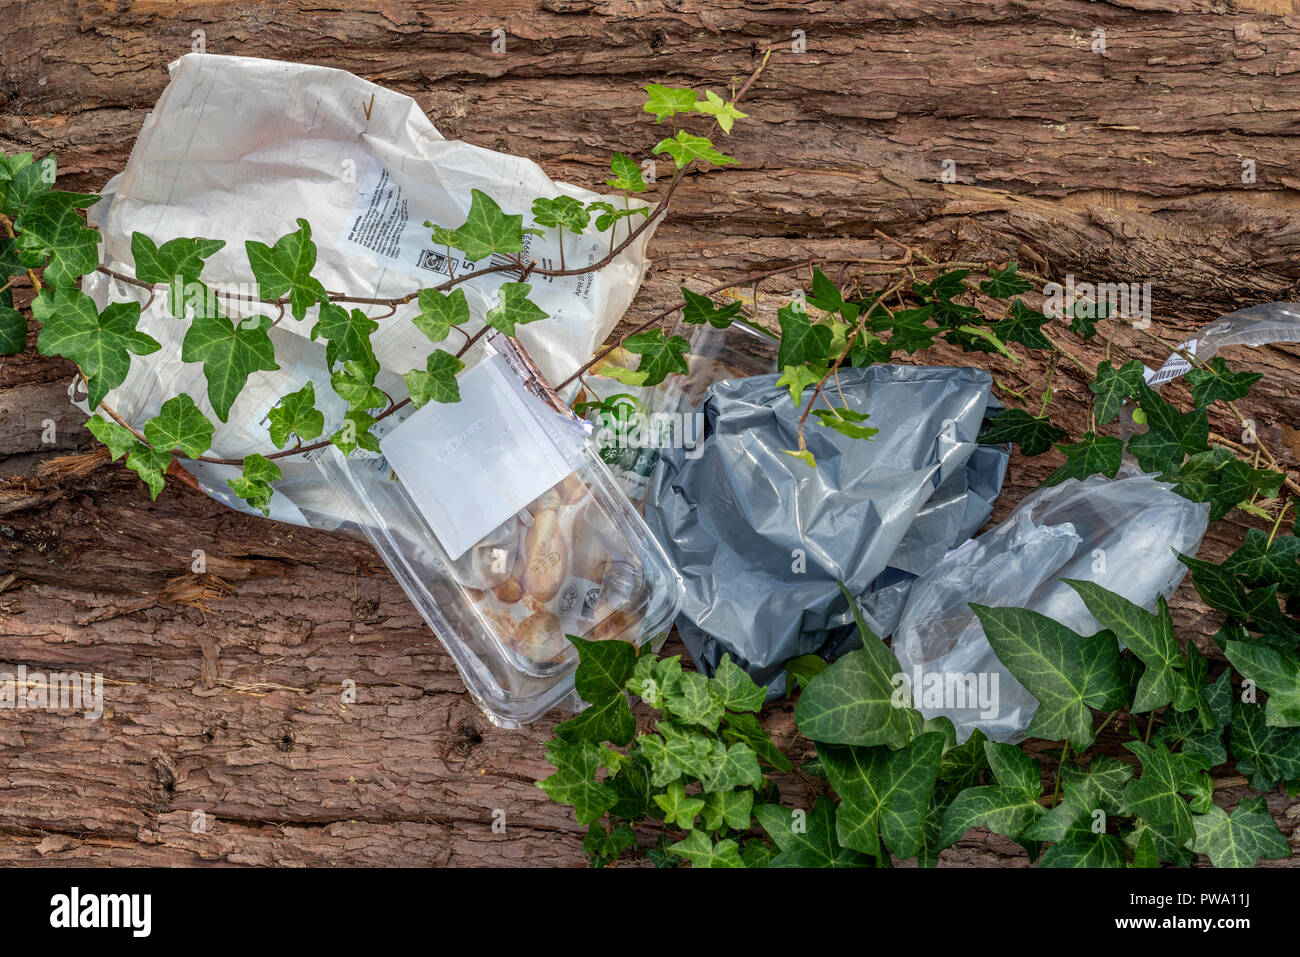 Plastic waste abandoned in the countryside. Environment pollution with rubbish overgrown by vegetation. Stock Photo